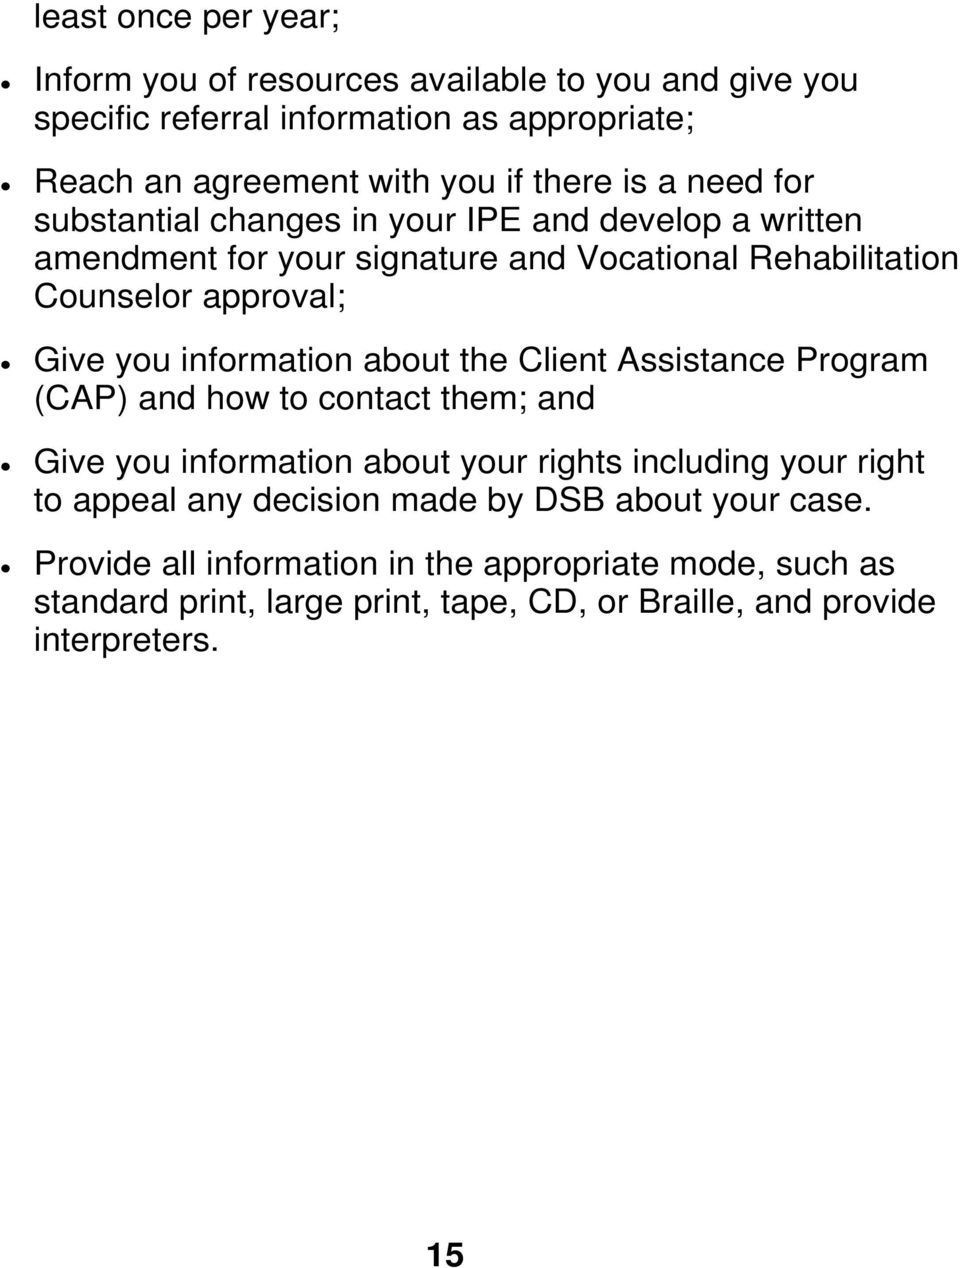 information about the Client Assistance Program (CAP) and how to contact them; and Give you information about your rights including your right to appeal any